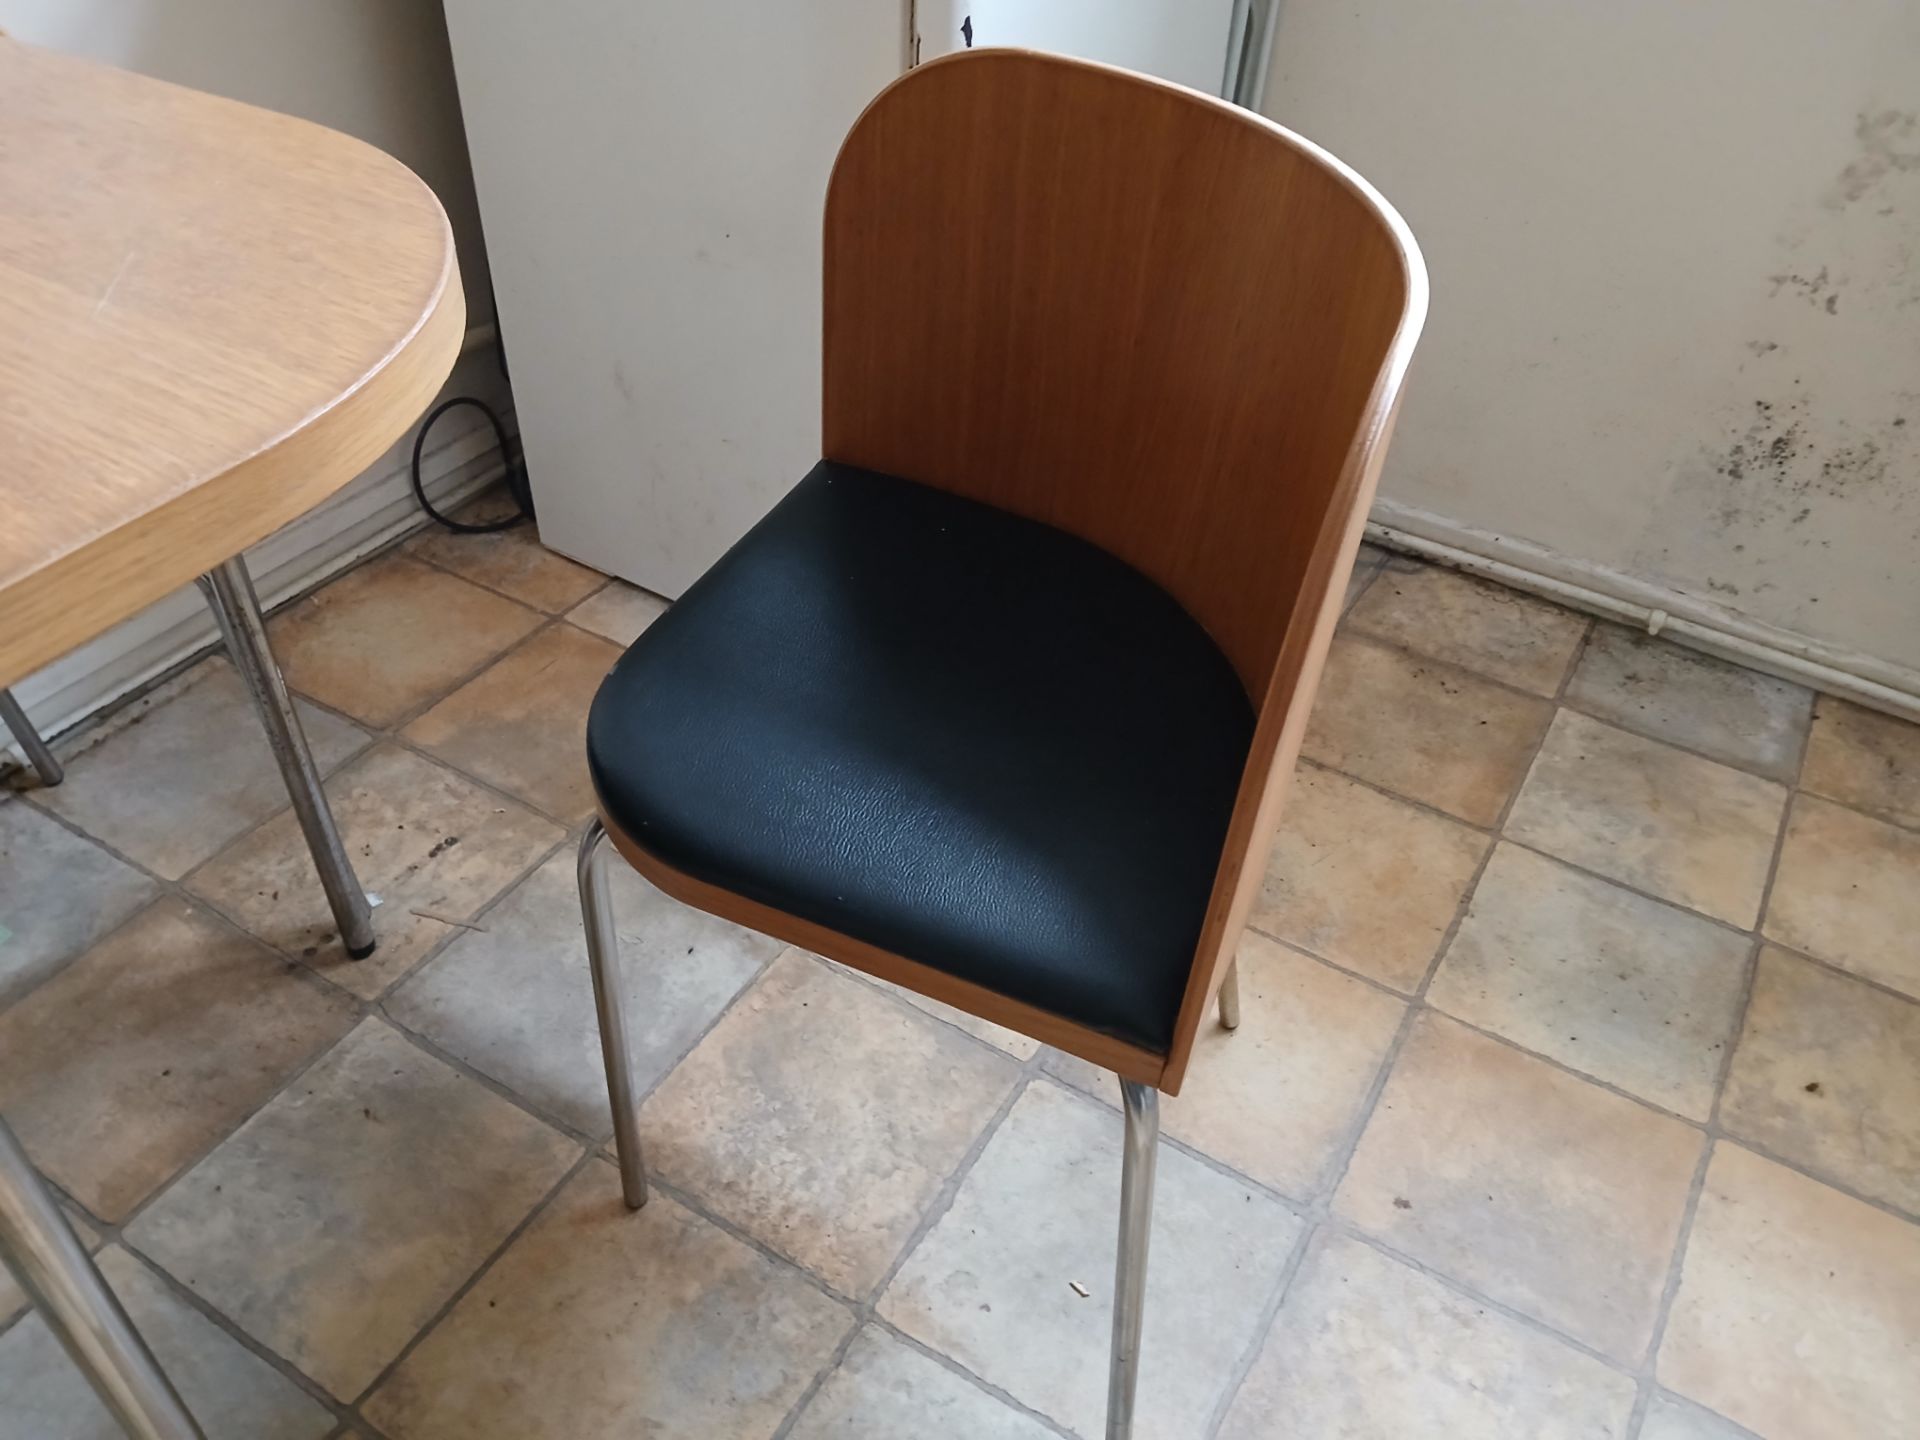 Shaped Table, with 4 x Chairs - Image 3 of 4